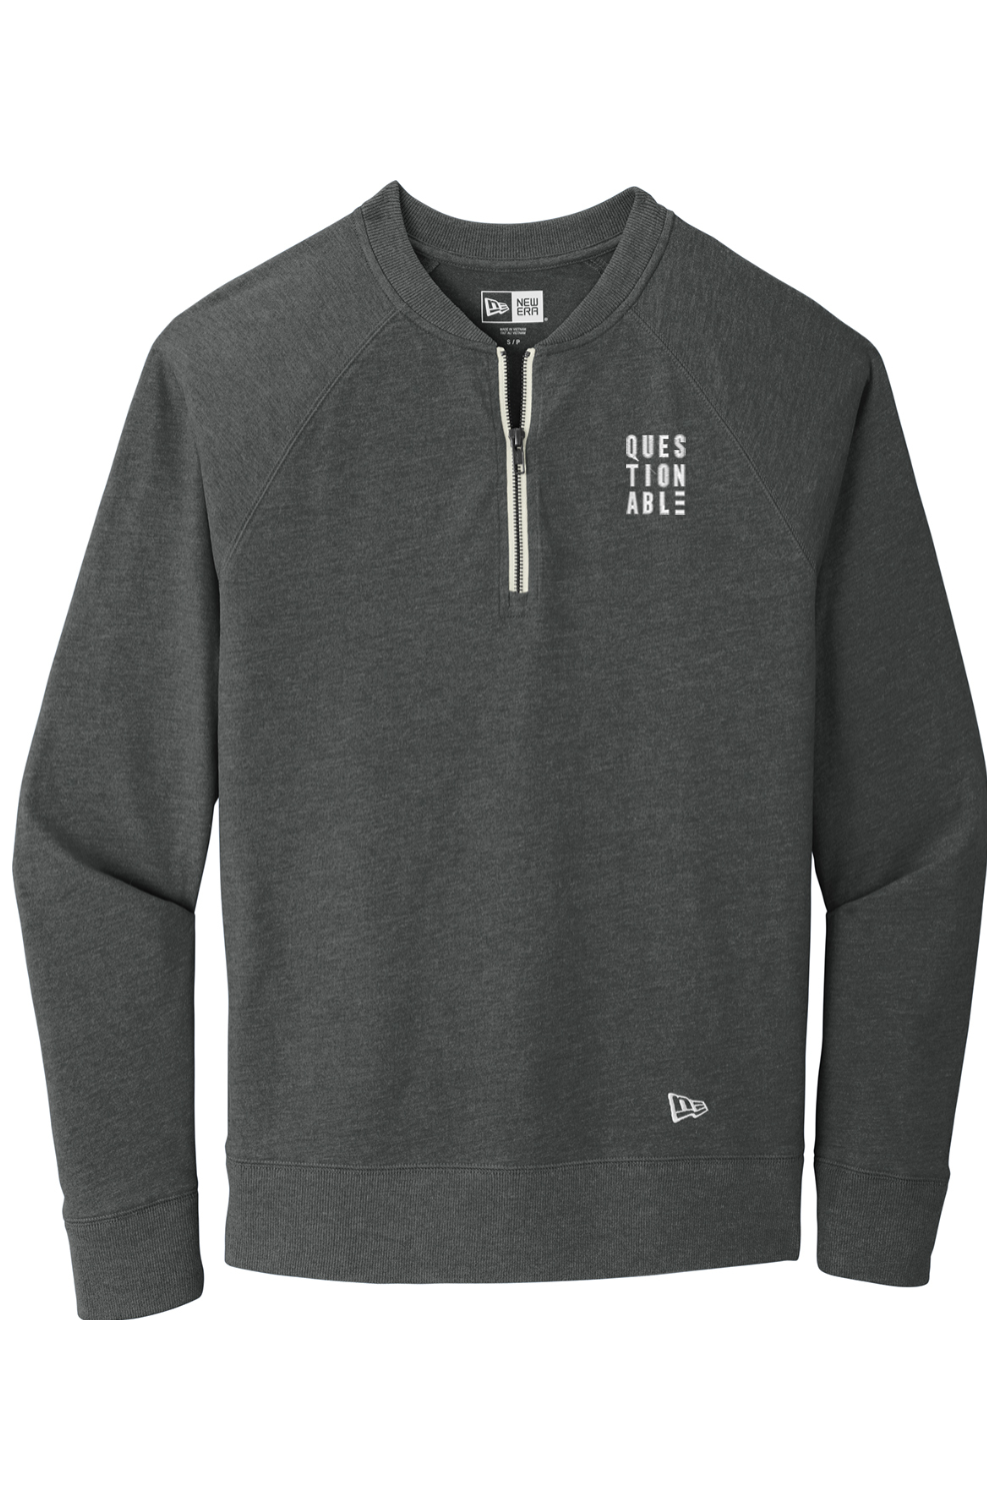 Questionable - New Era Sueded Cotton Blend 1/4-Zip Pullover